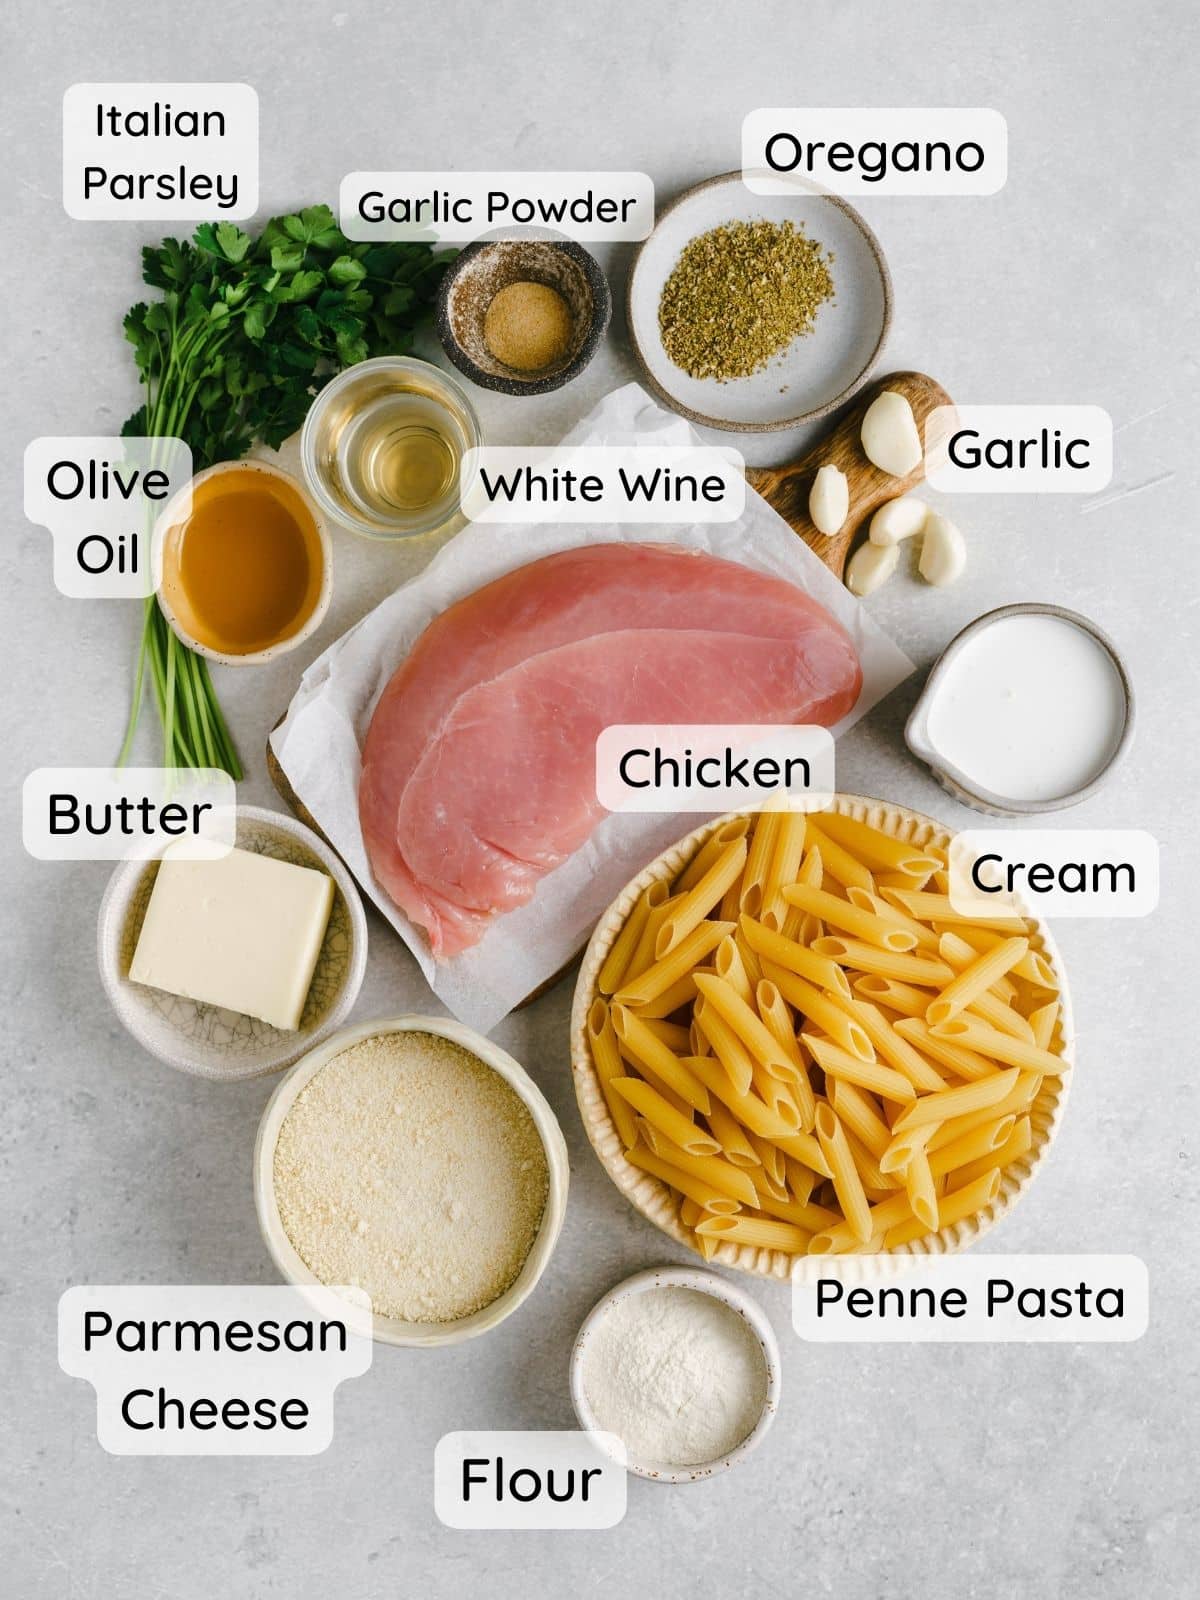 A shot of all the ingredients in this recipe with the following text: chicken, penne pasta, butter, olive oil, cream, white wine, italian parsley, oregano, garlic powder, chicken, garlic, flour."